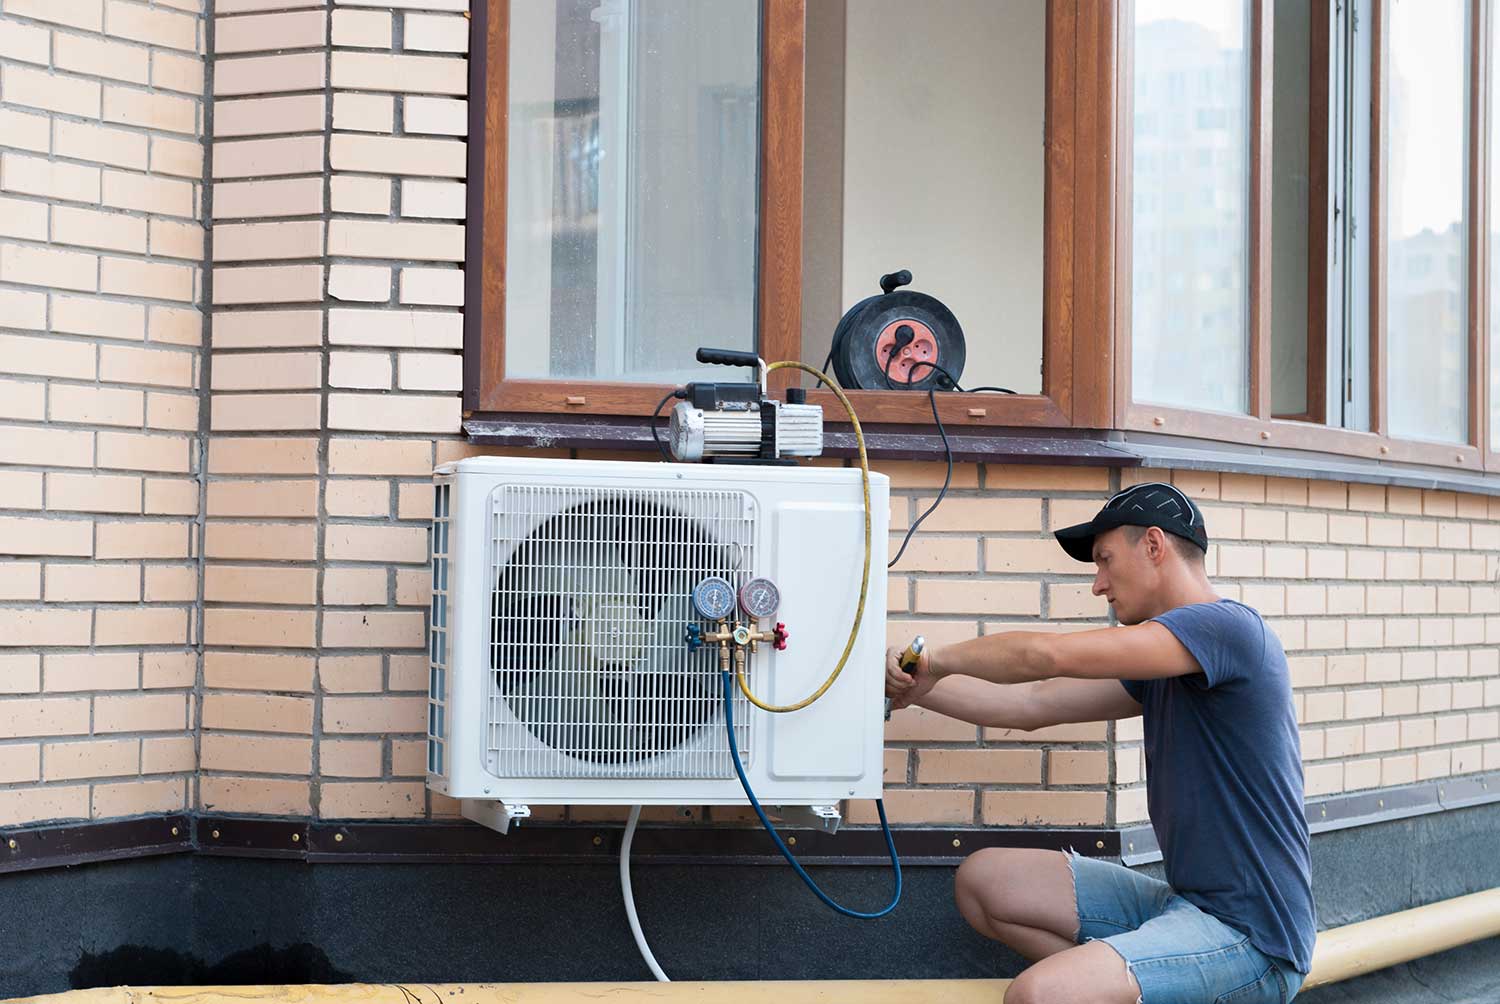 Speculation on how numerous time your Heating, Ventilation & A/C system should be checked